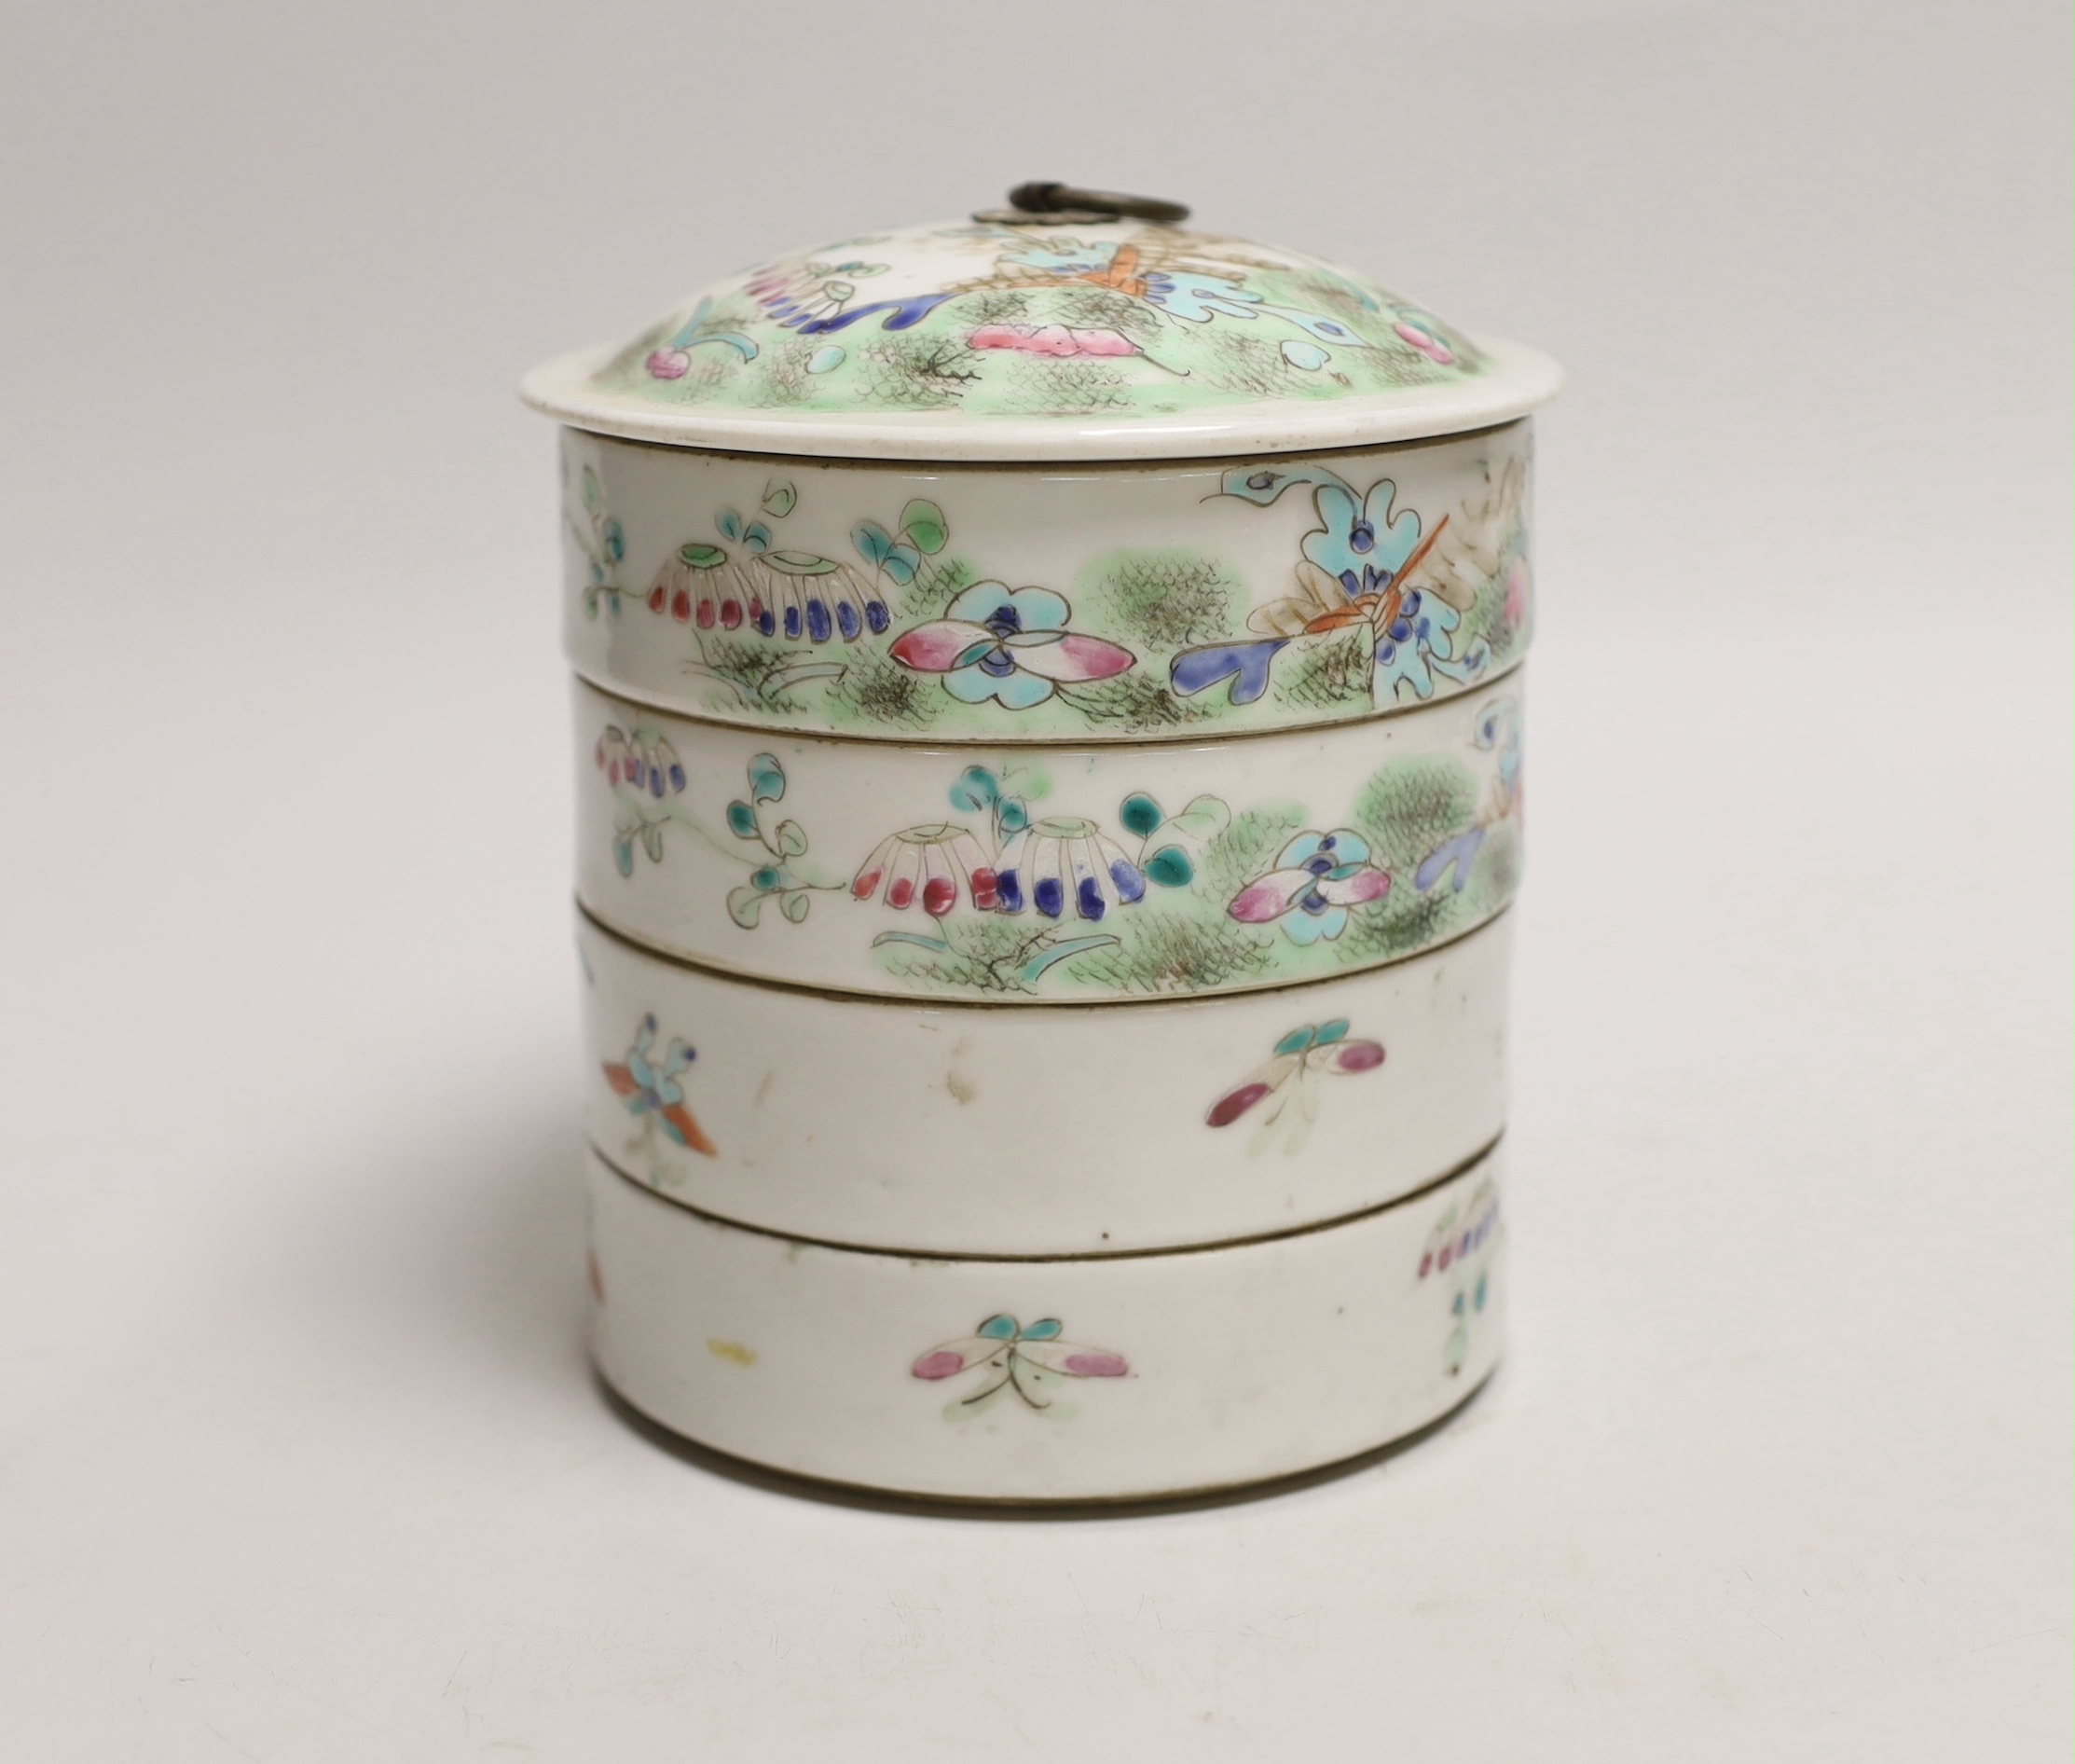 An early 20th century Chinese stacking food container, 13.5cm